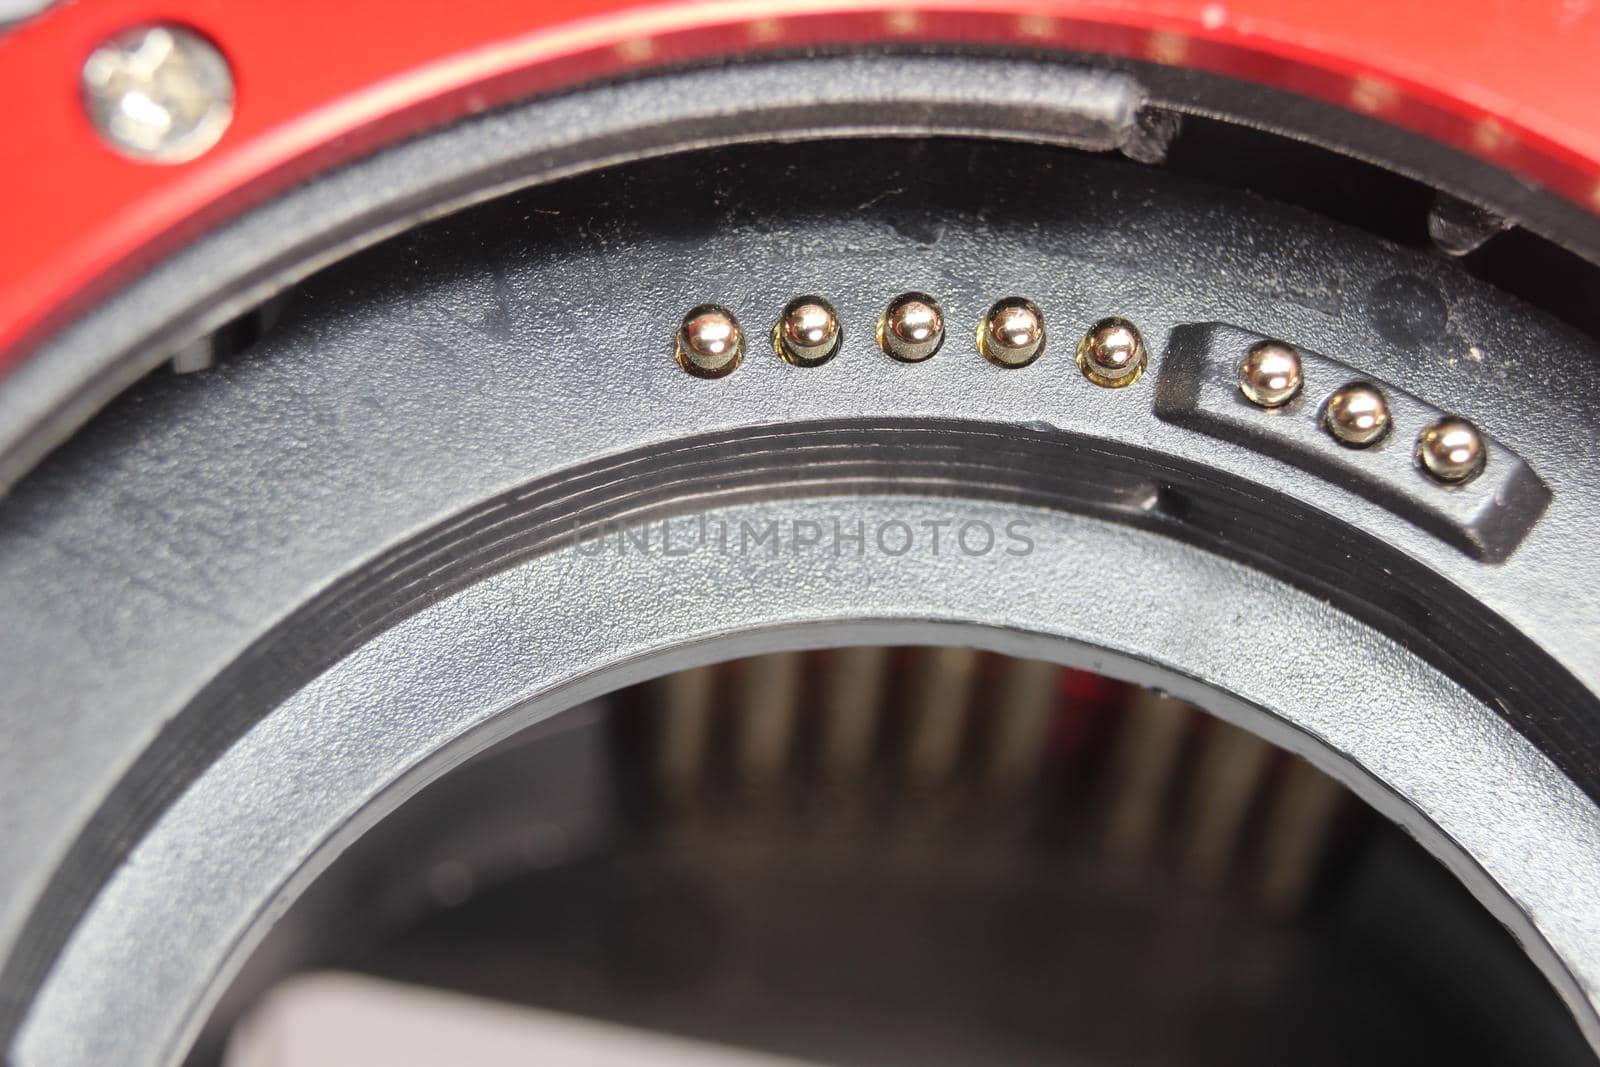 Extension tubes for camera lens to perform macro photography. Extension increase magnification of lens